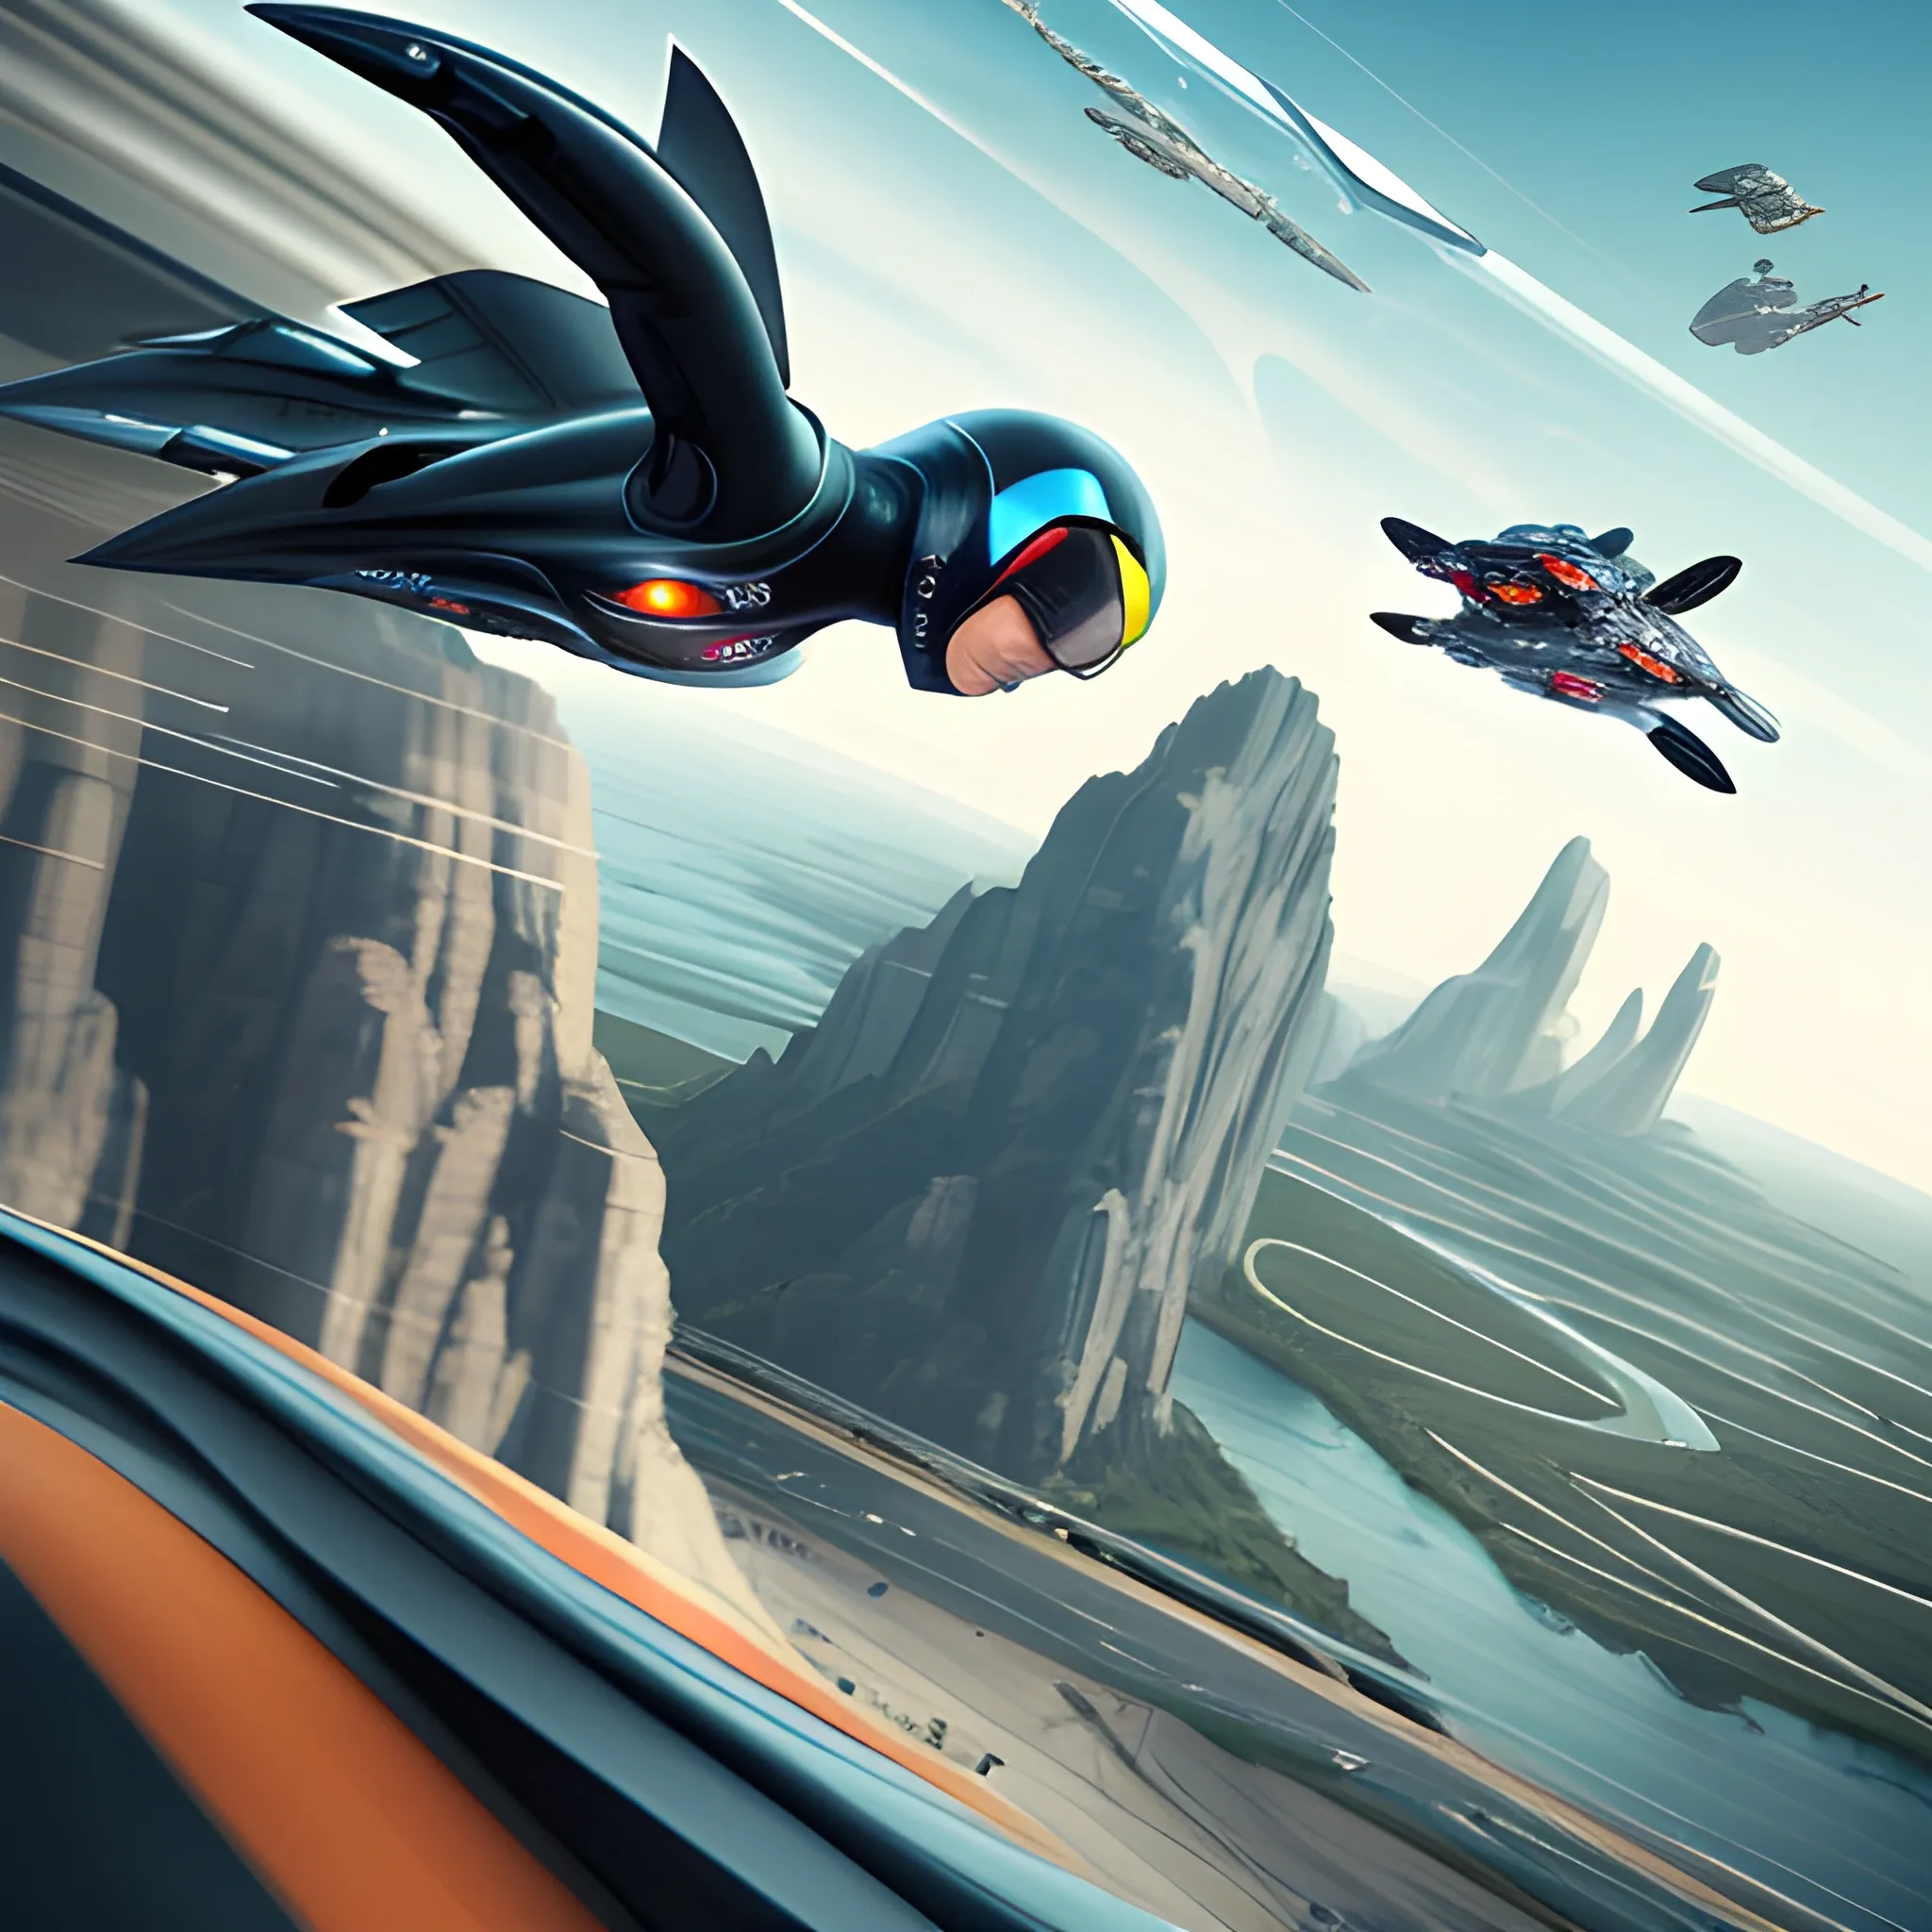 Dynamic scene featuring a high-speed race on a Sibling in a wing-suit diving jet-like past a huge cliff, racetrack floating in the sky captured in motion blur, surrounded by hovering platforms and sci-fi cities below, showcasing the innovation of anti-gravity racing. The poster features futuristic colors and detailed textures to convey innovation and adrenaline, Trippy